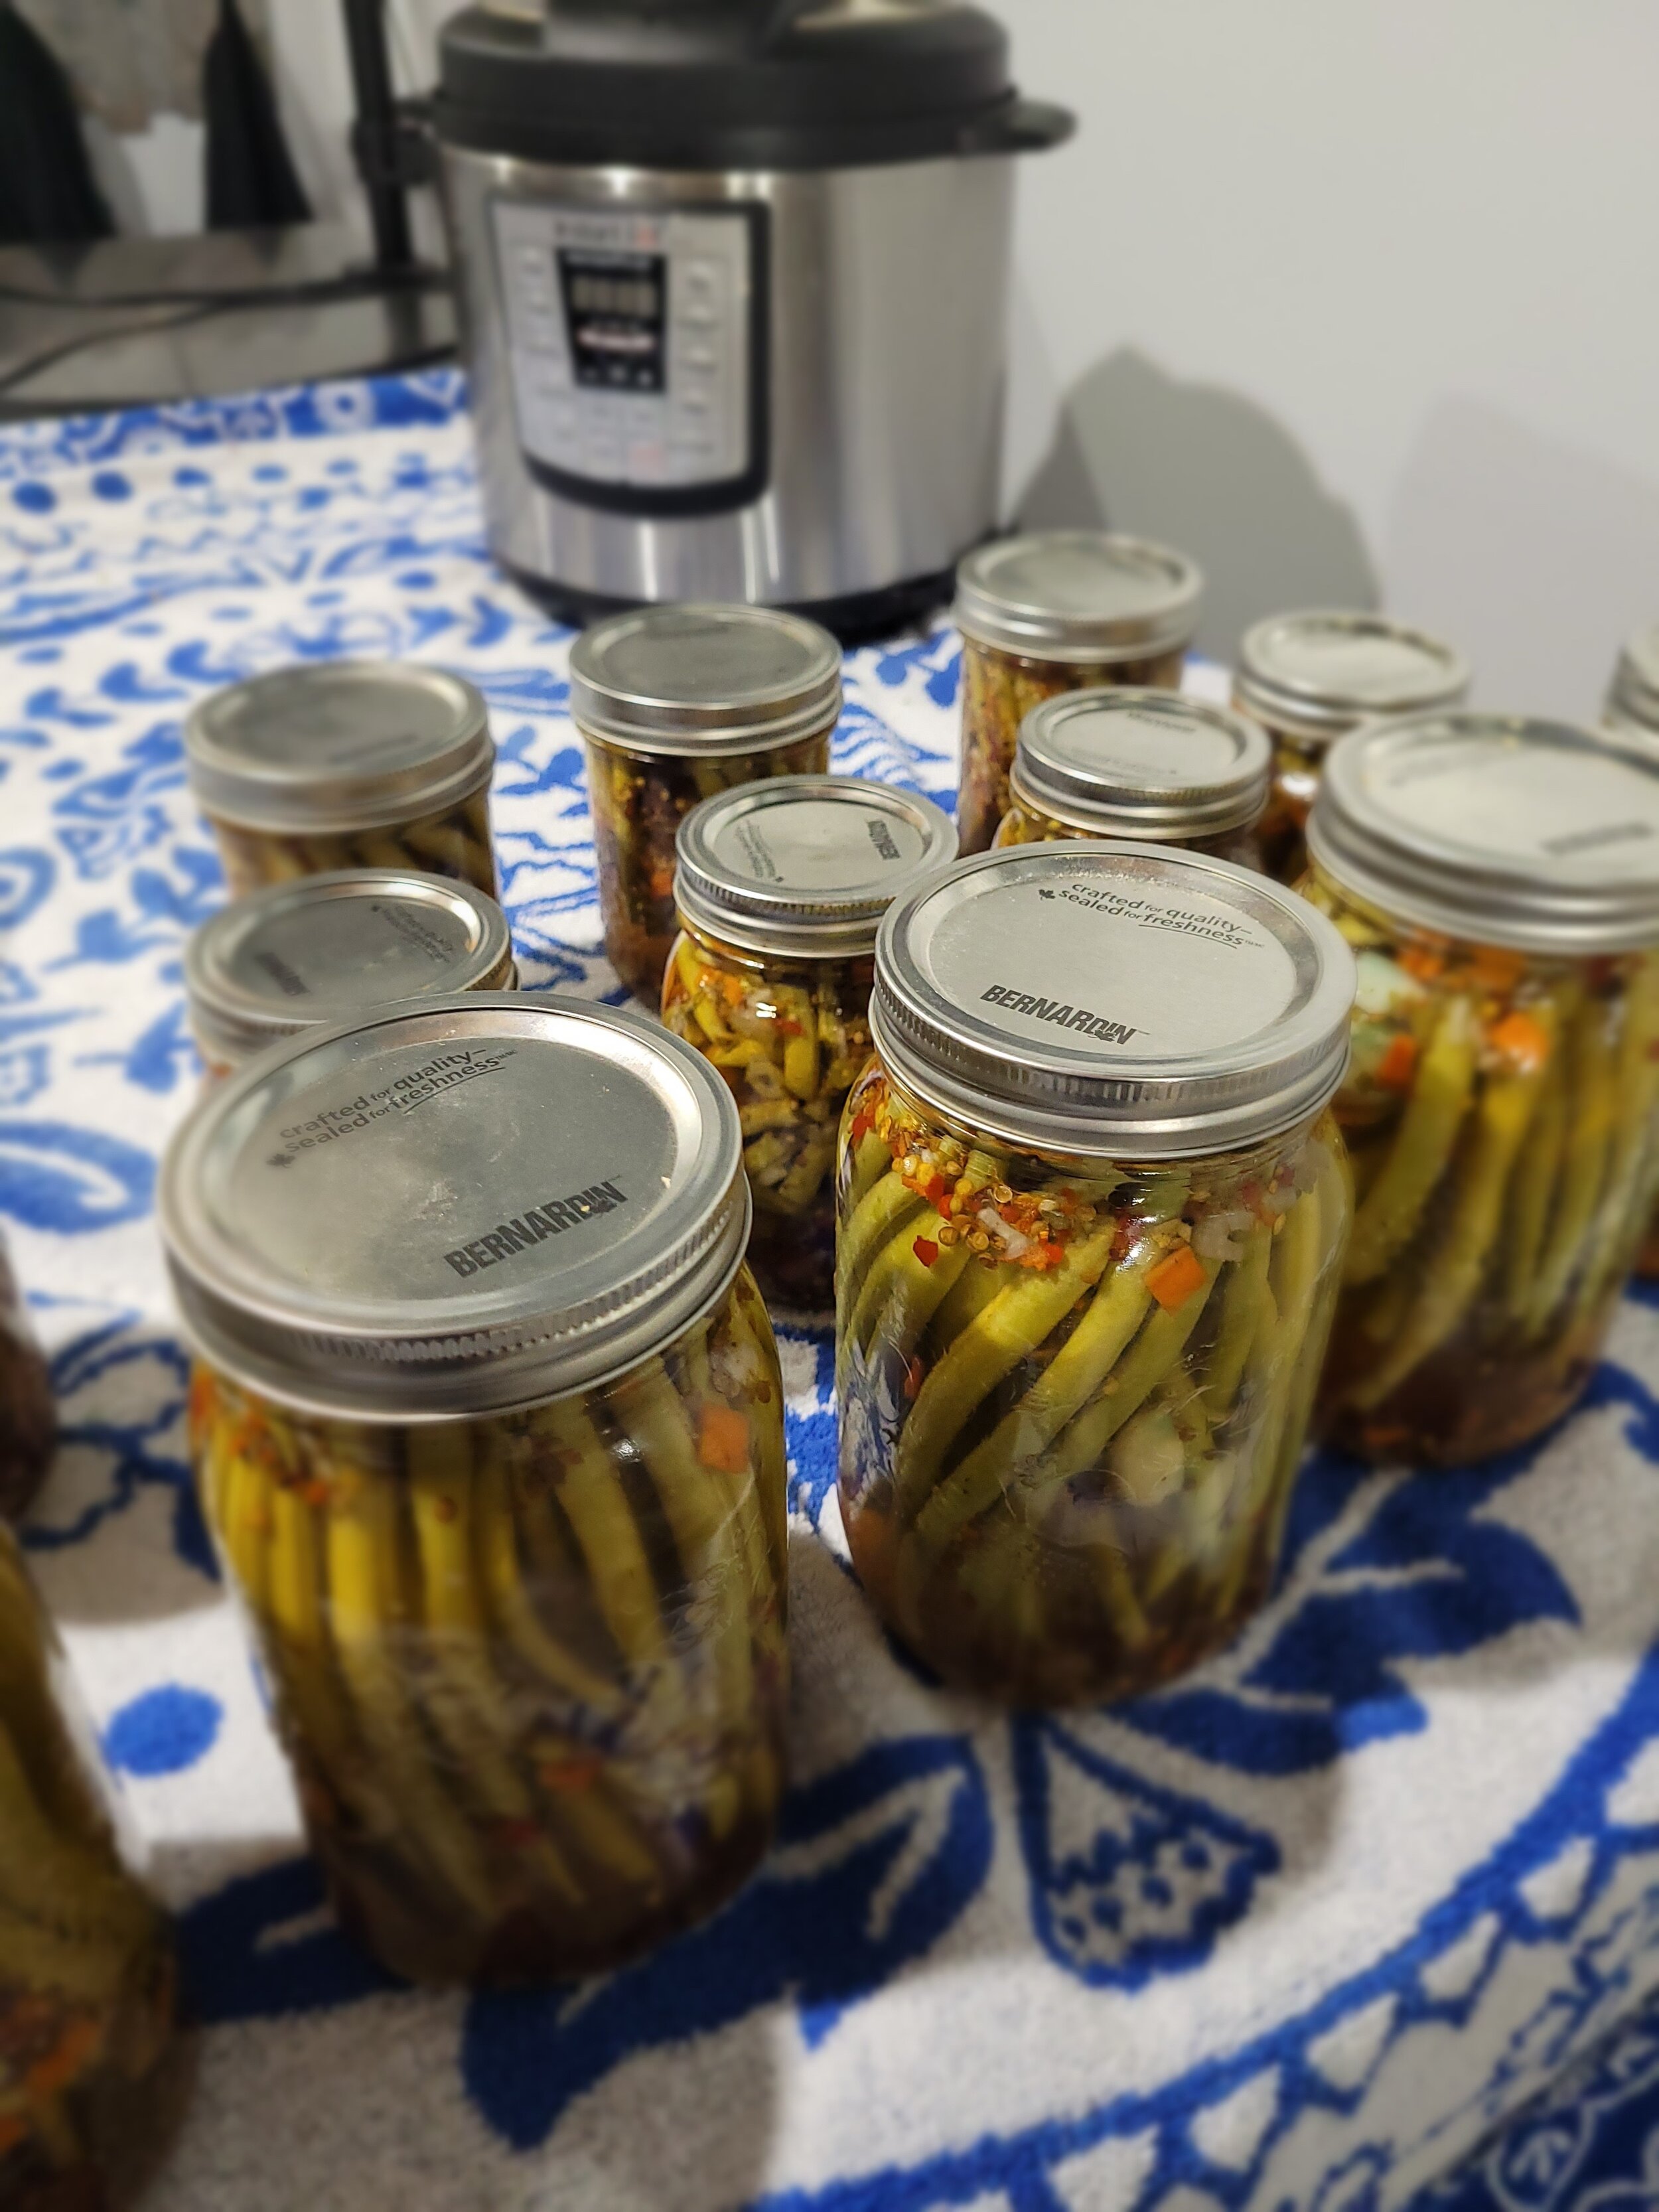 Pressure canning green beans with my new instapot!